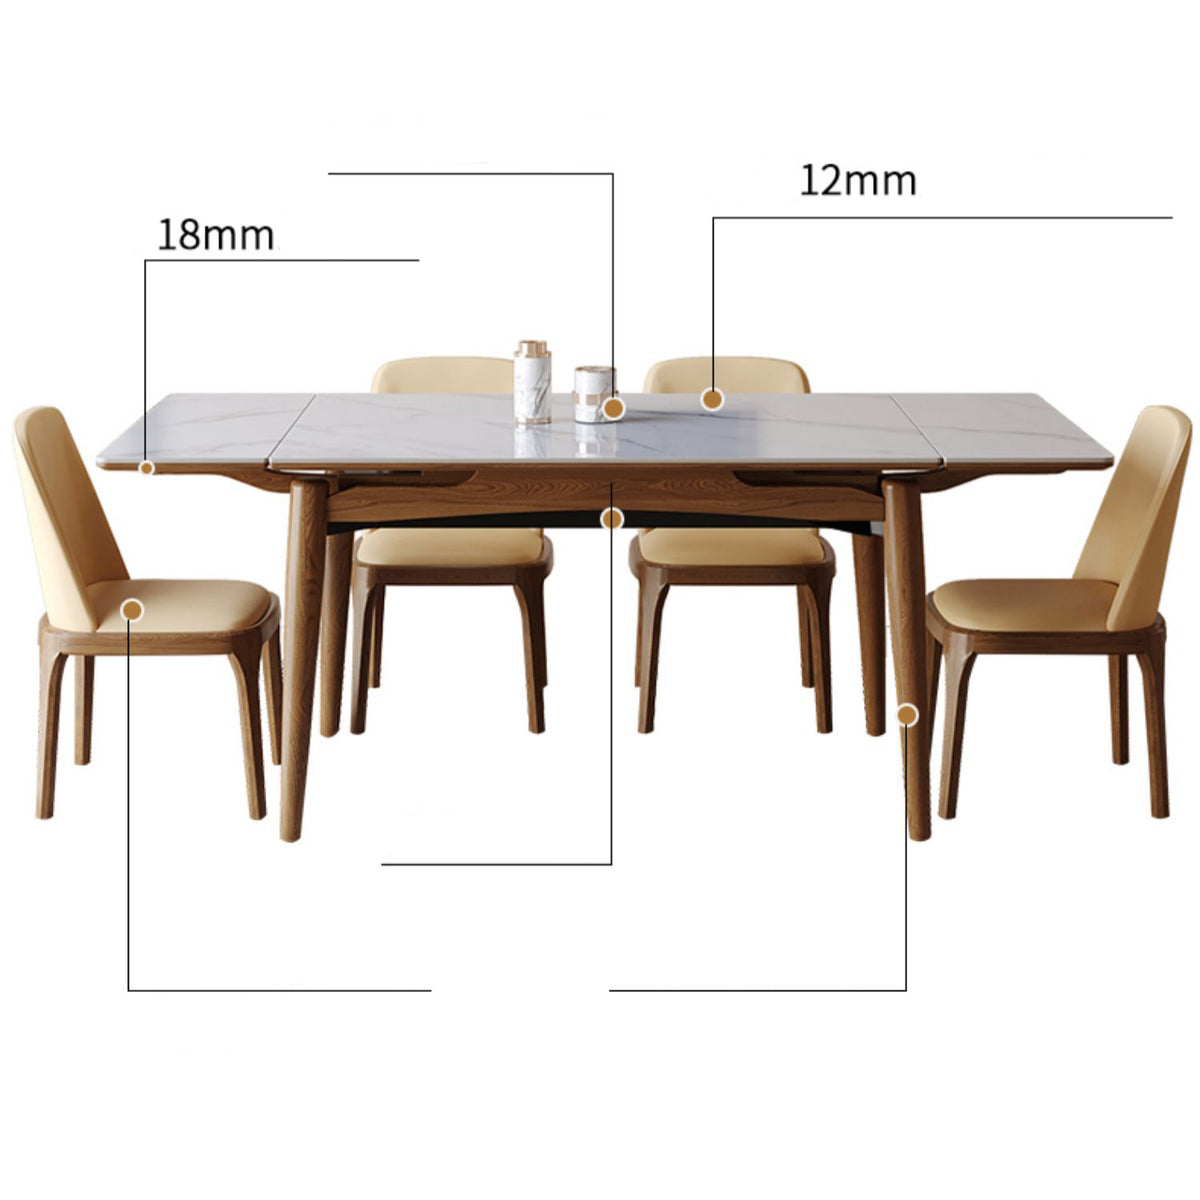 Elegant Brown Framed Table with Natural Sintered Stone and Ash Wood Finish fmbs-008